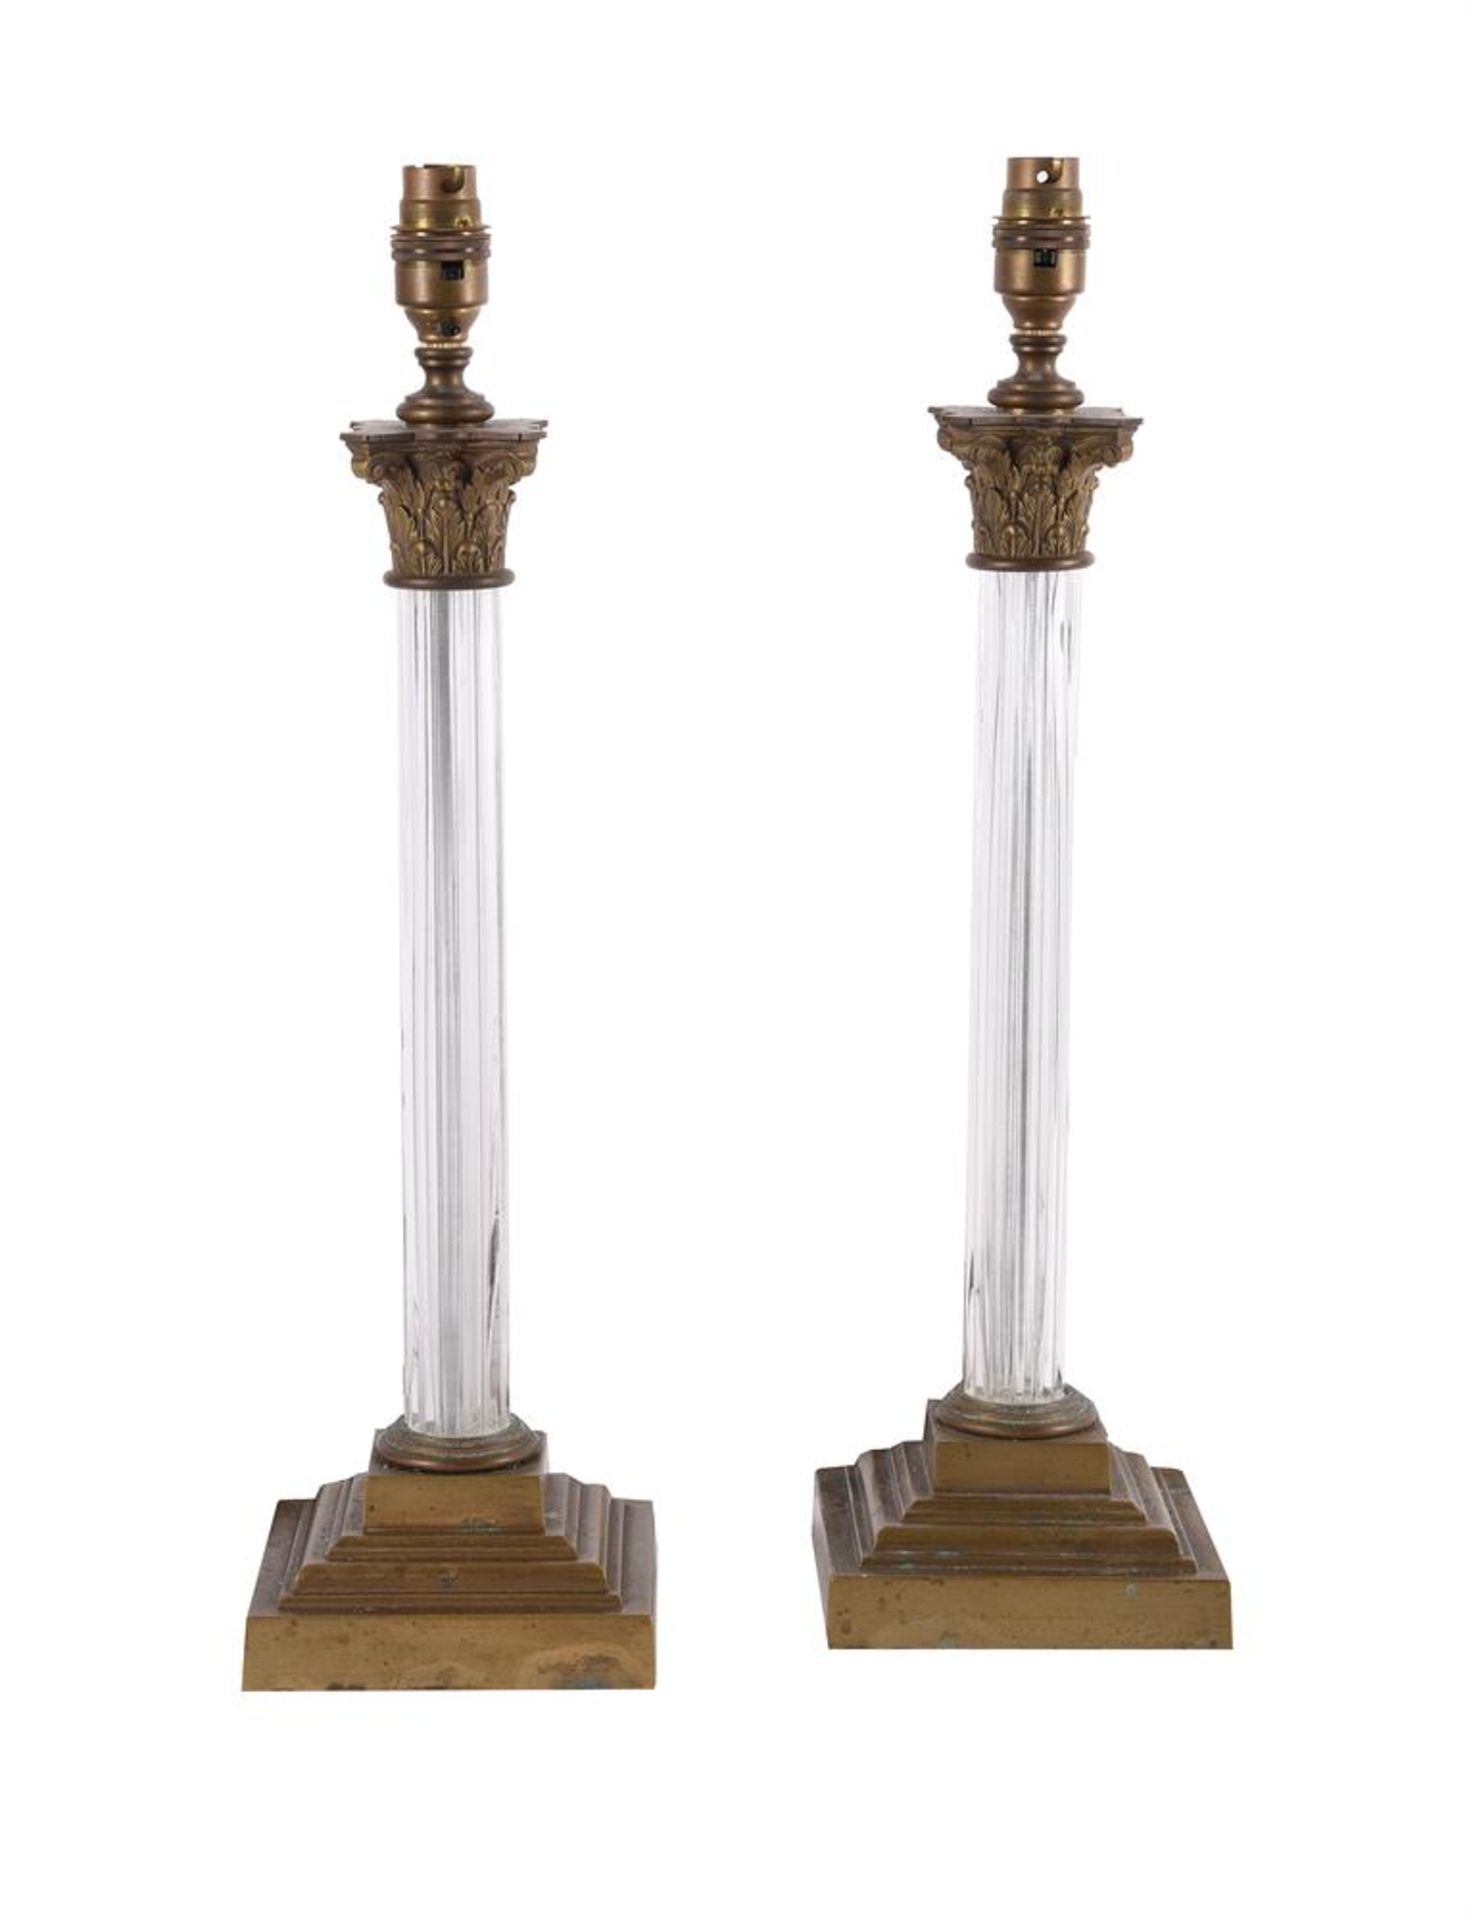 A PAIR OF MOULDED GLASS COLUMNAR LAMPS, IN CORINTHIAN TASTE